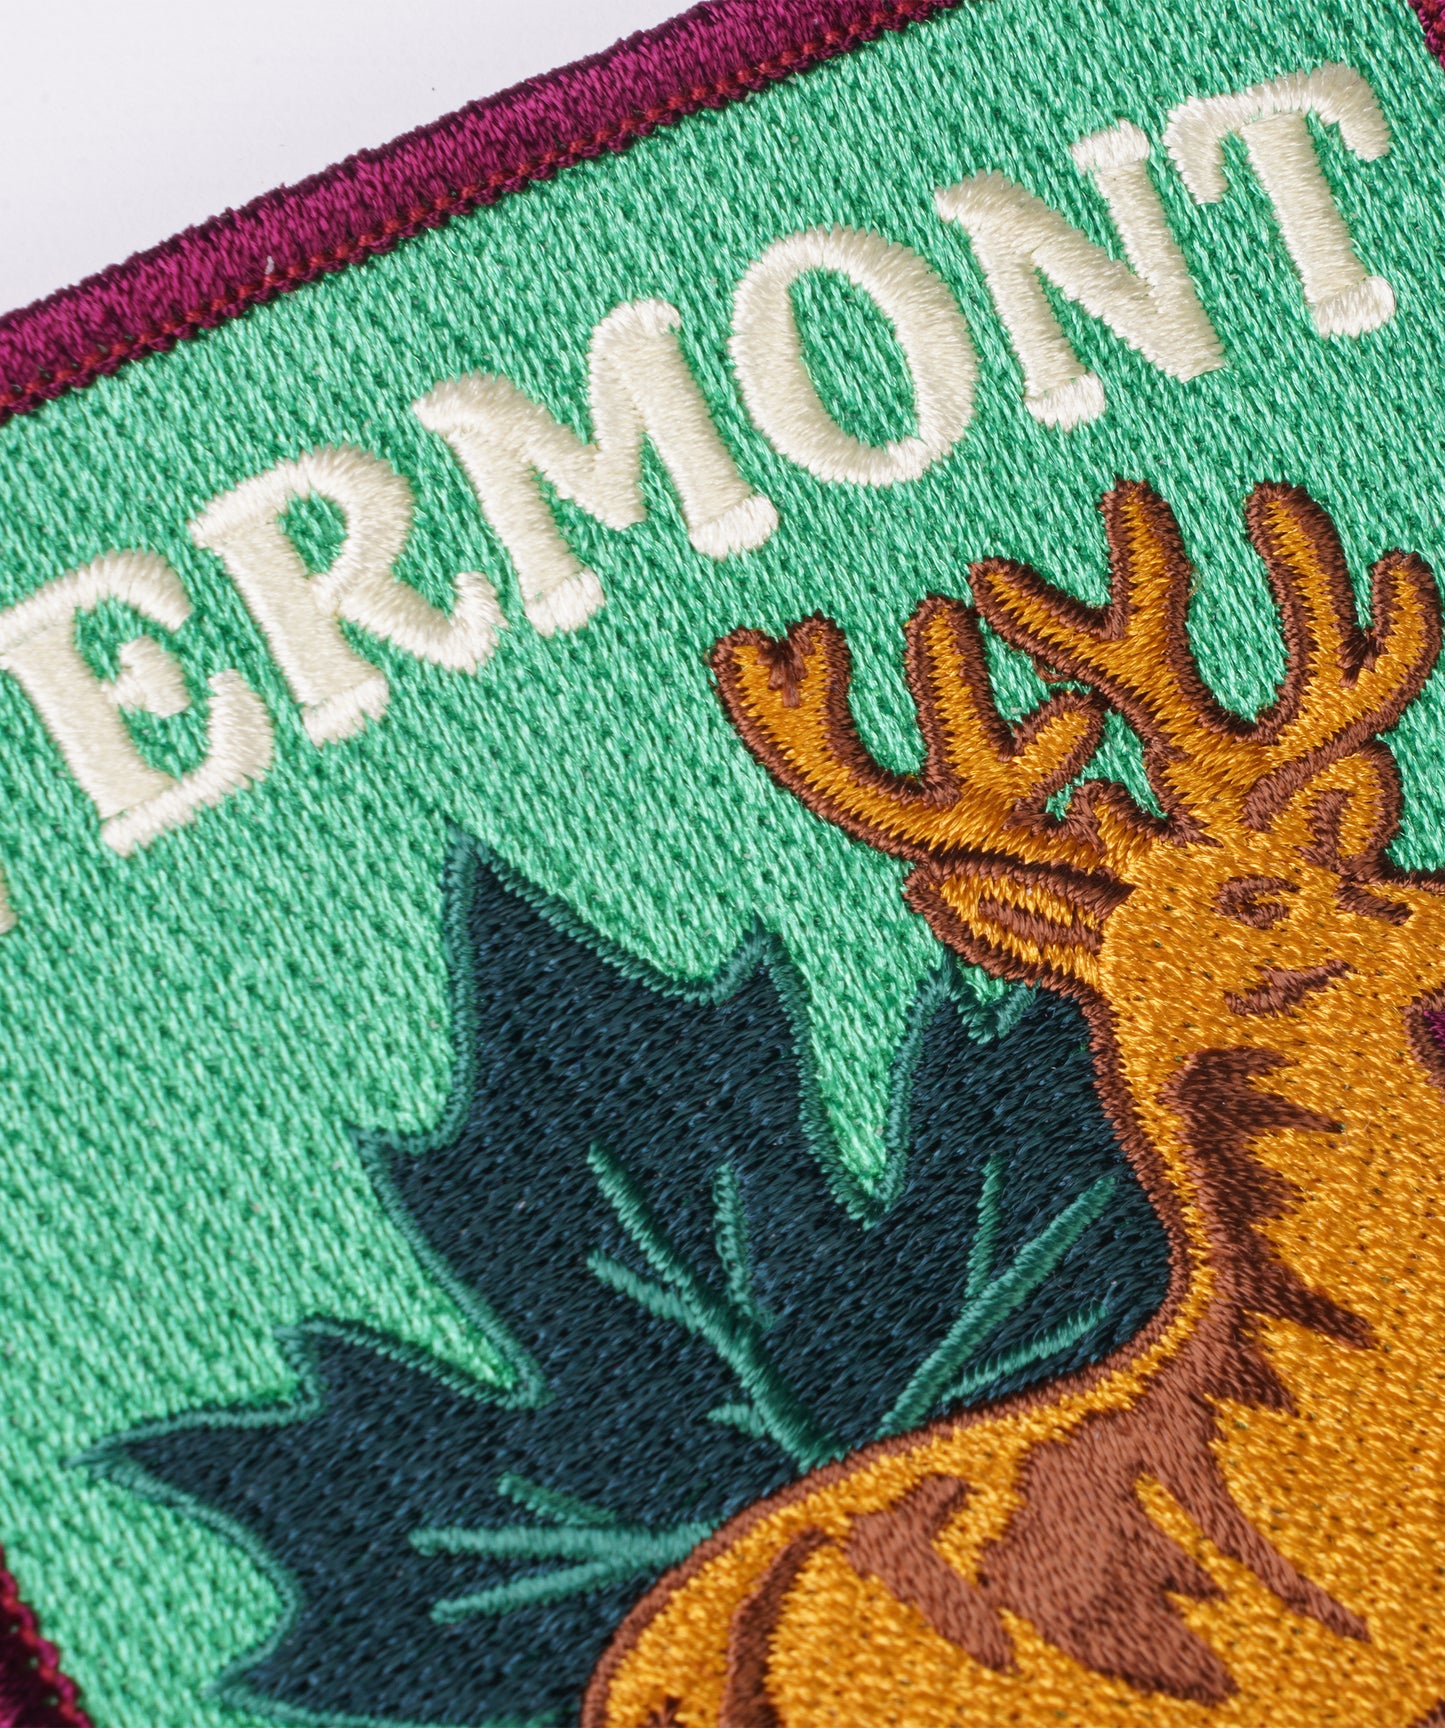 Vermont Embroidered Patch